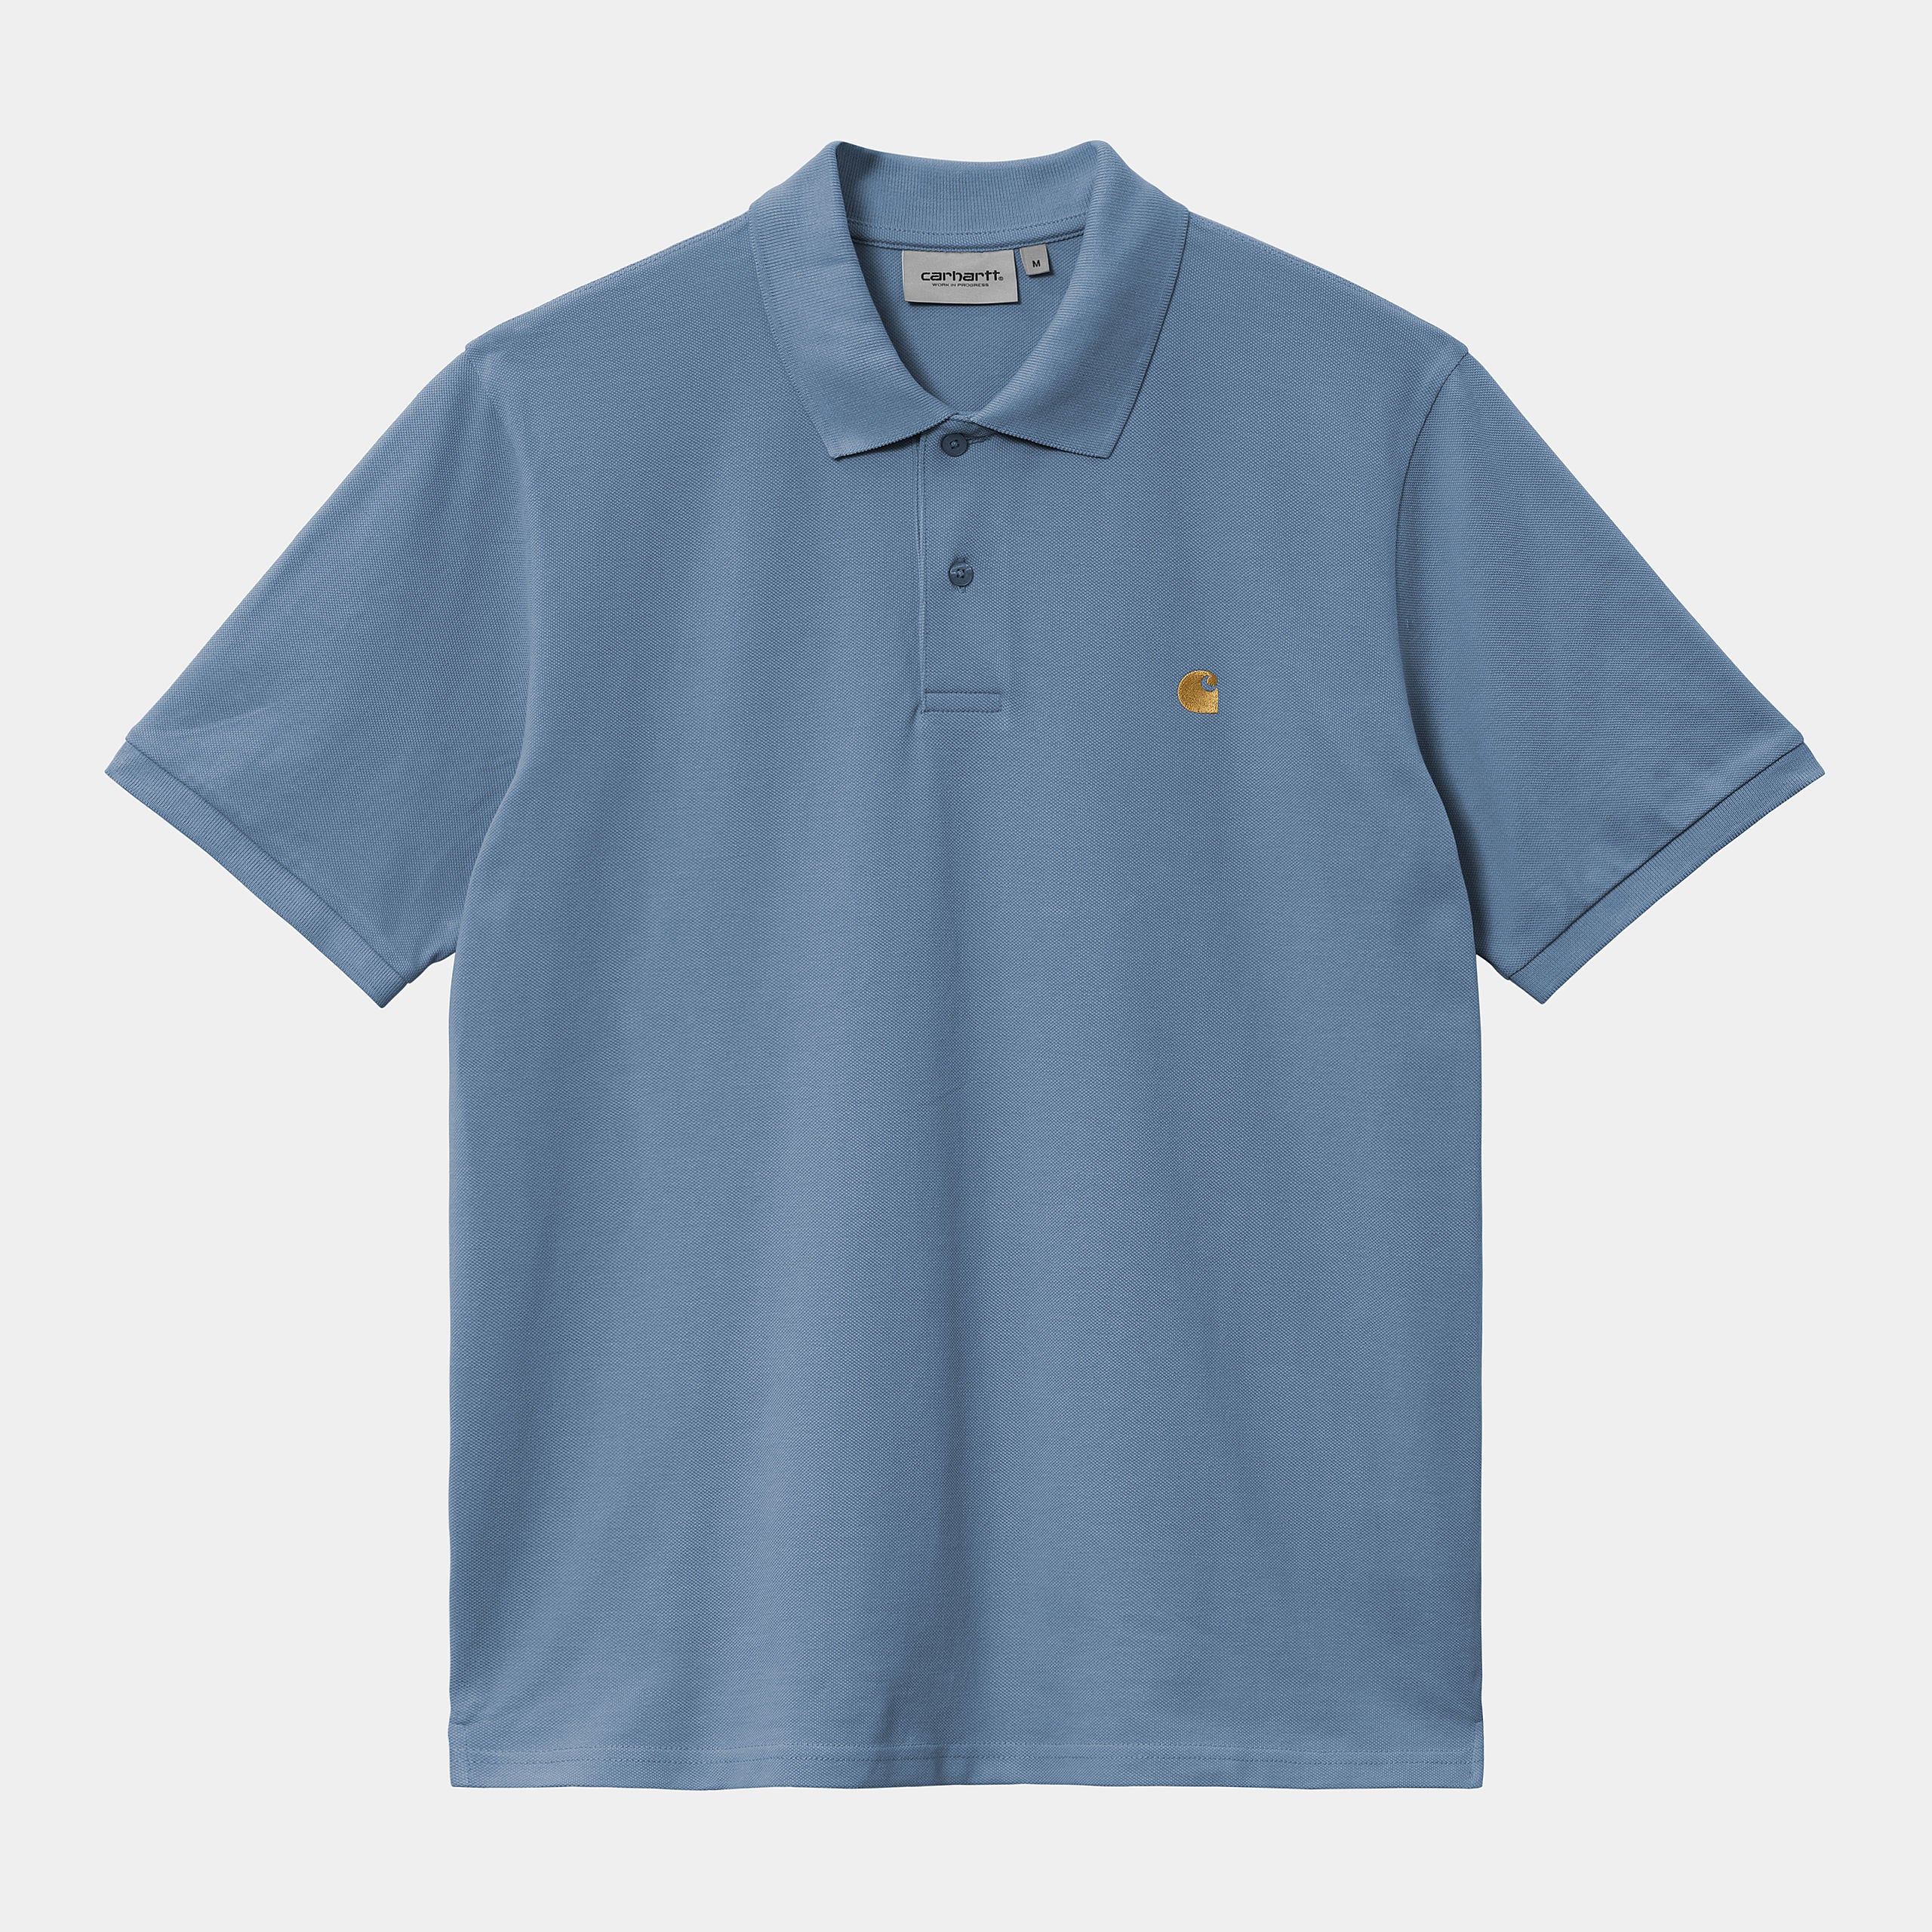 Chase Pique Sorrent / Gold Polo Shirt-Close up view